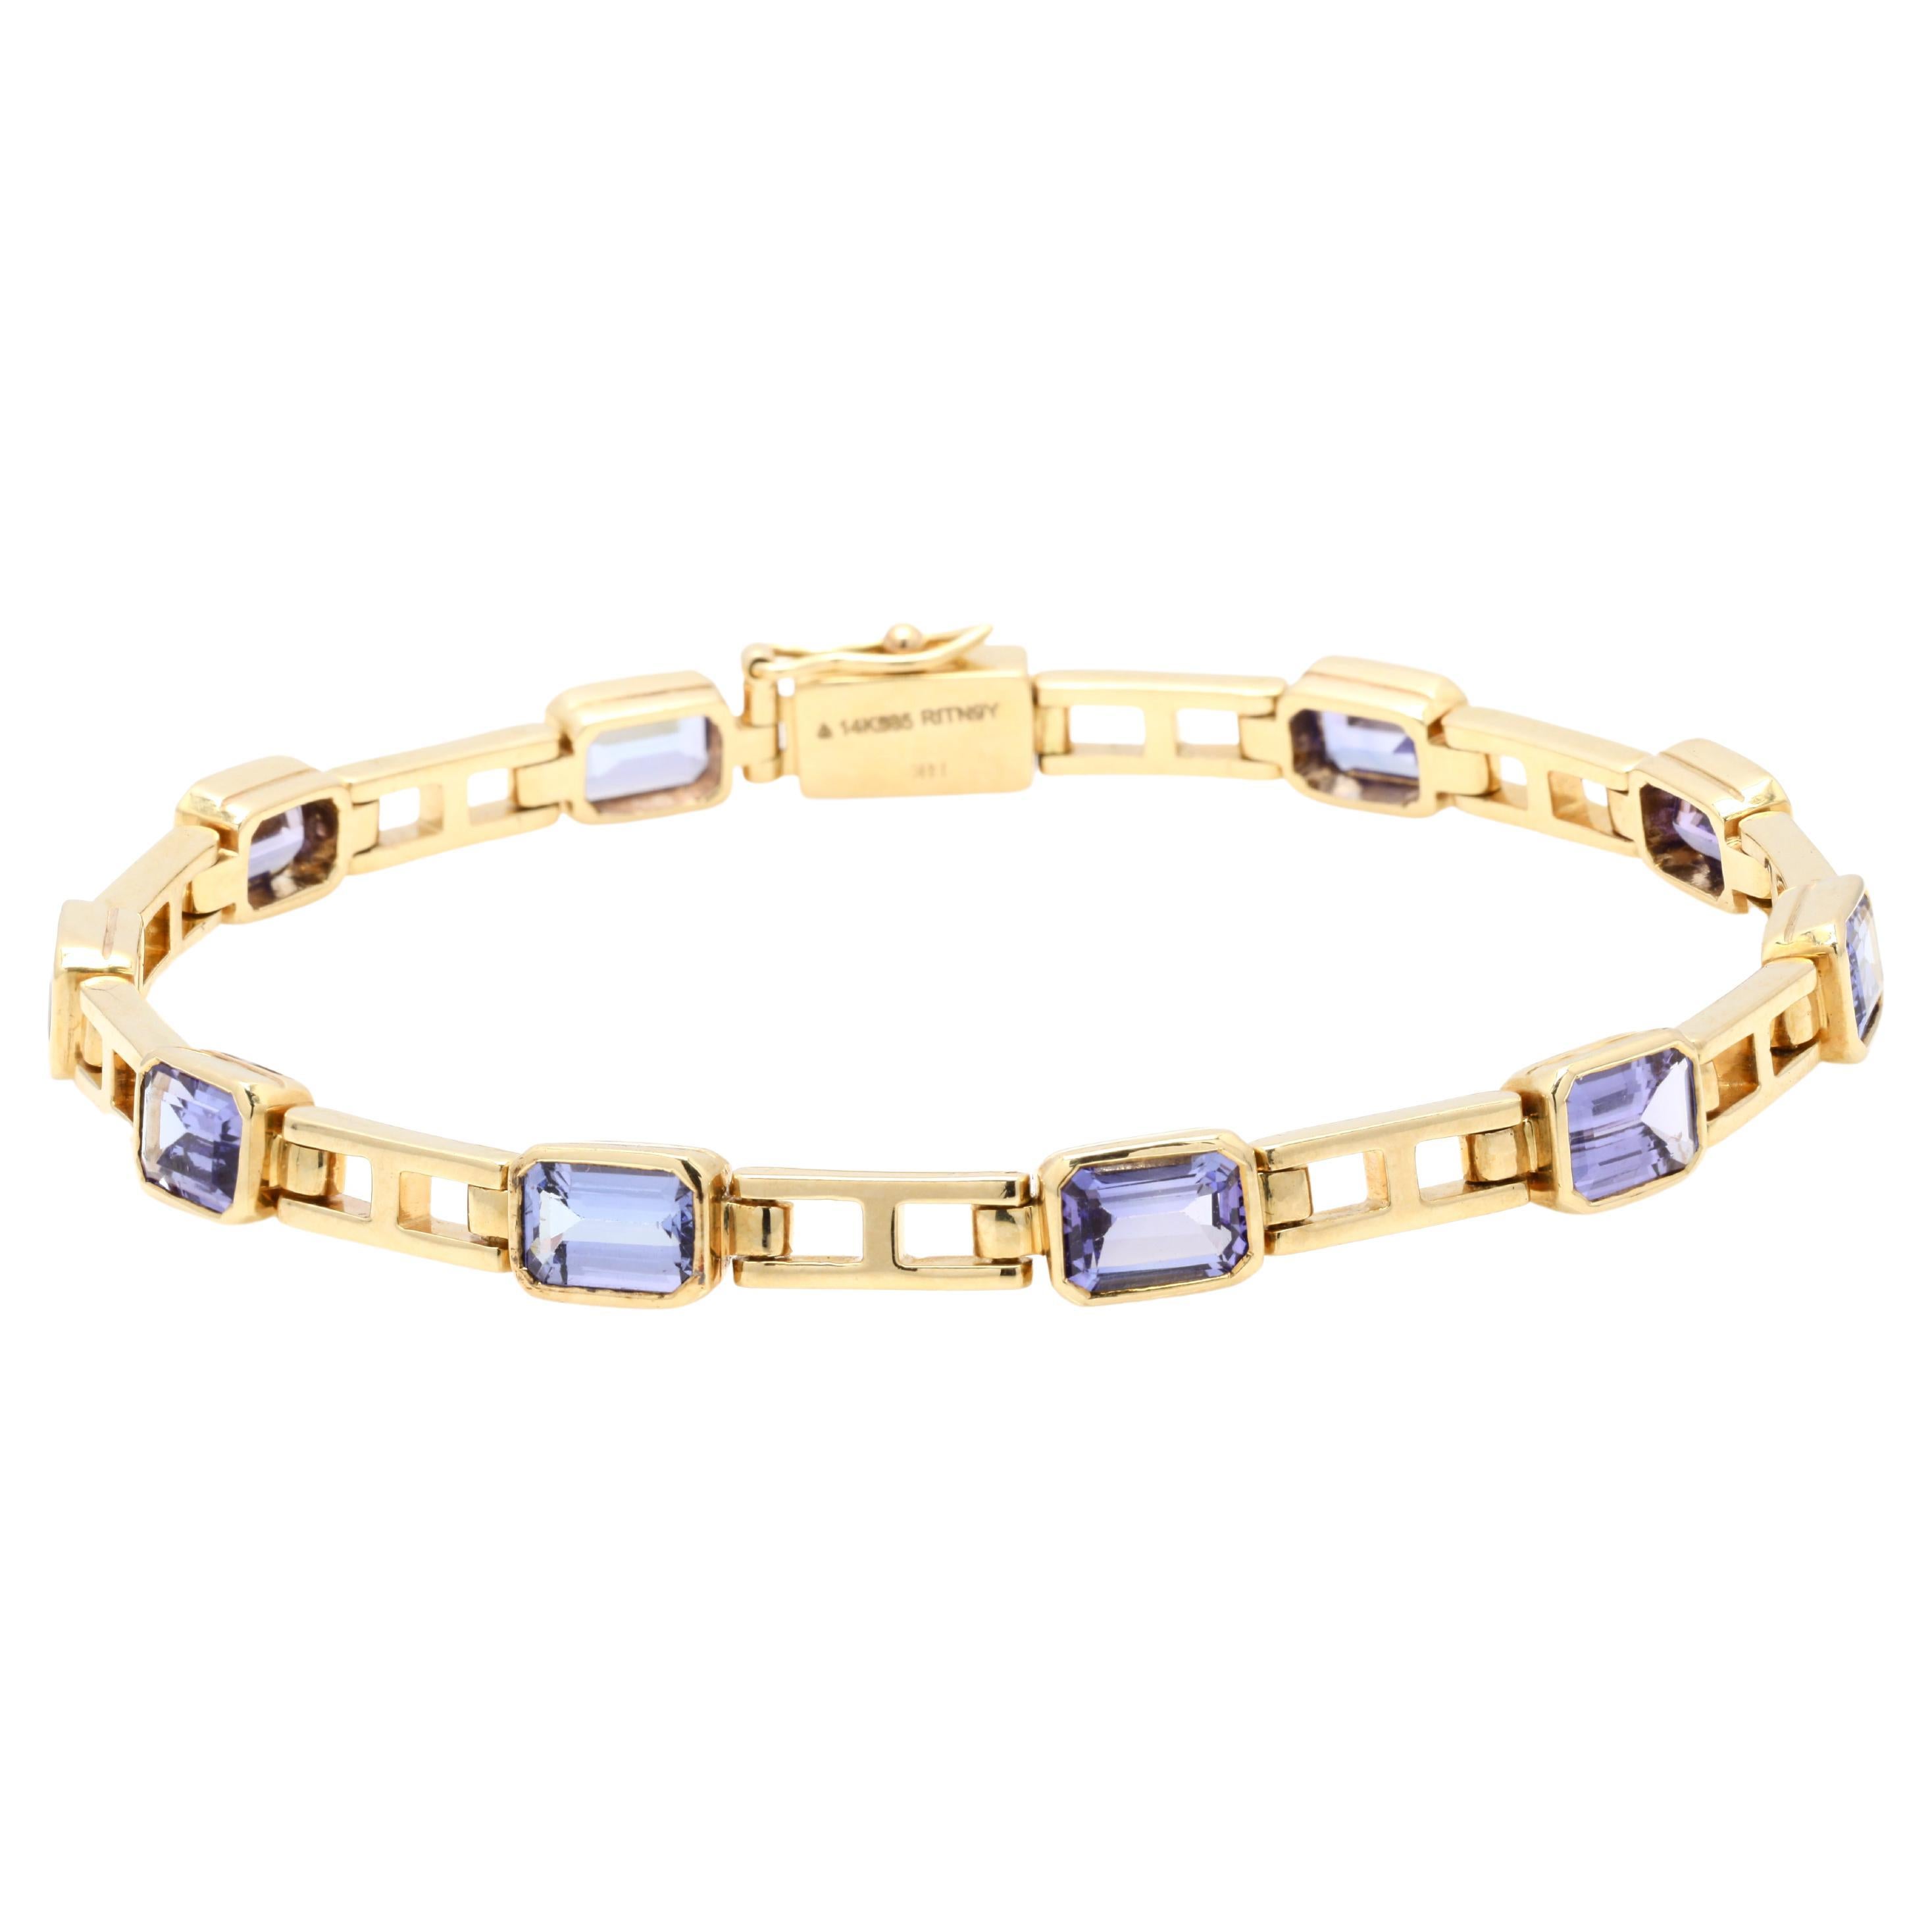 6.82 cts Bejeweled Tanzanite Tennis Bracelet Made in 14K Yellow Gold For Sale